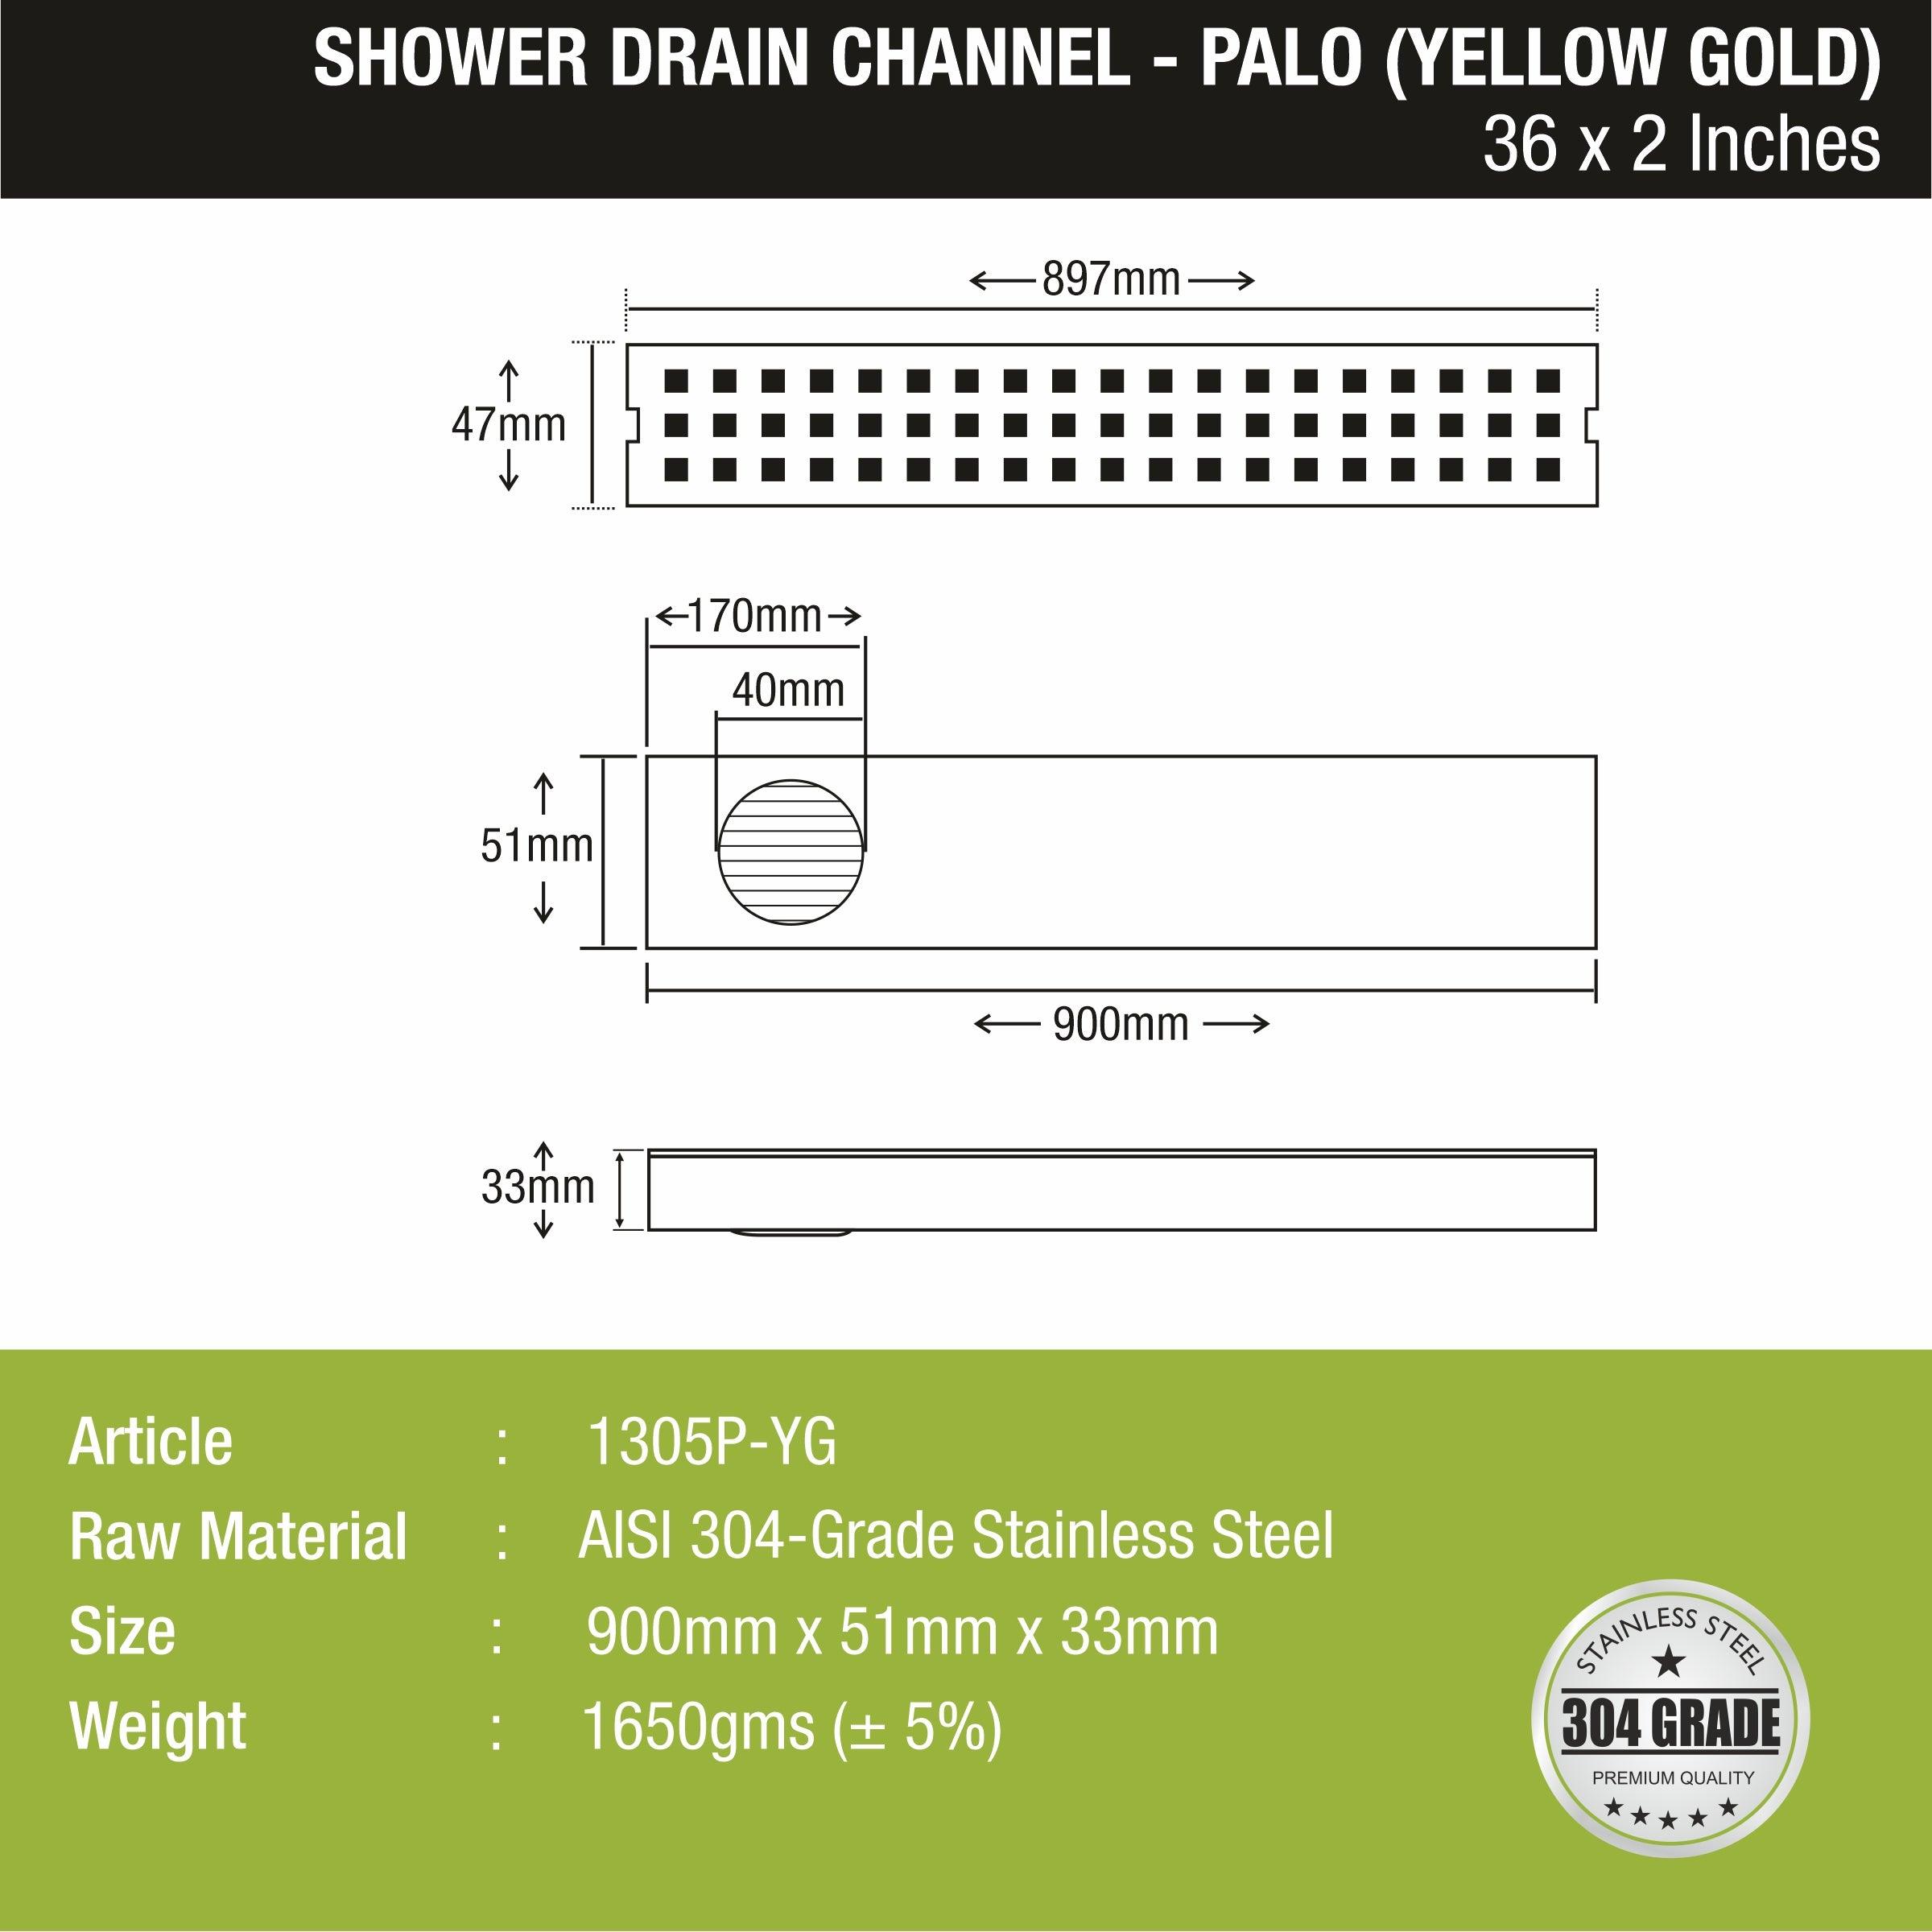 Palo Shower Drain Channel - Yellow Gold (36 x 2 Inches) sizes and dimensions